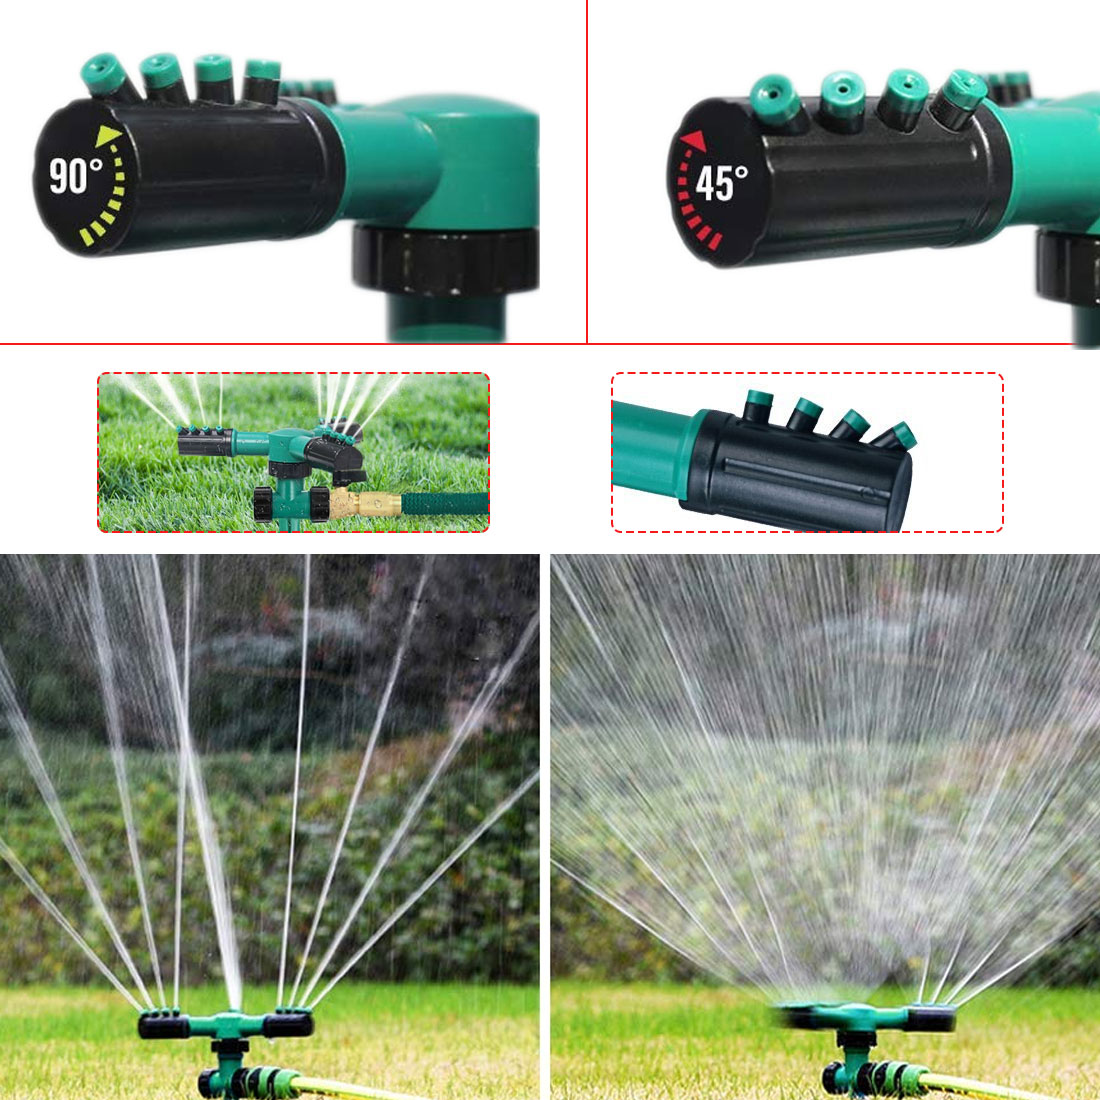 360° Automatic Rotating Lawn Sprinkler Garden Grass Watering System Water Spray 